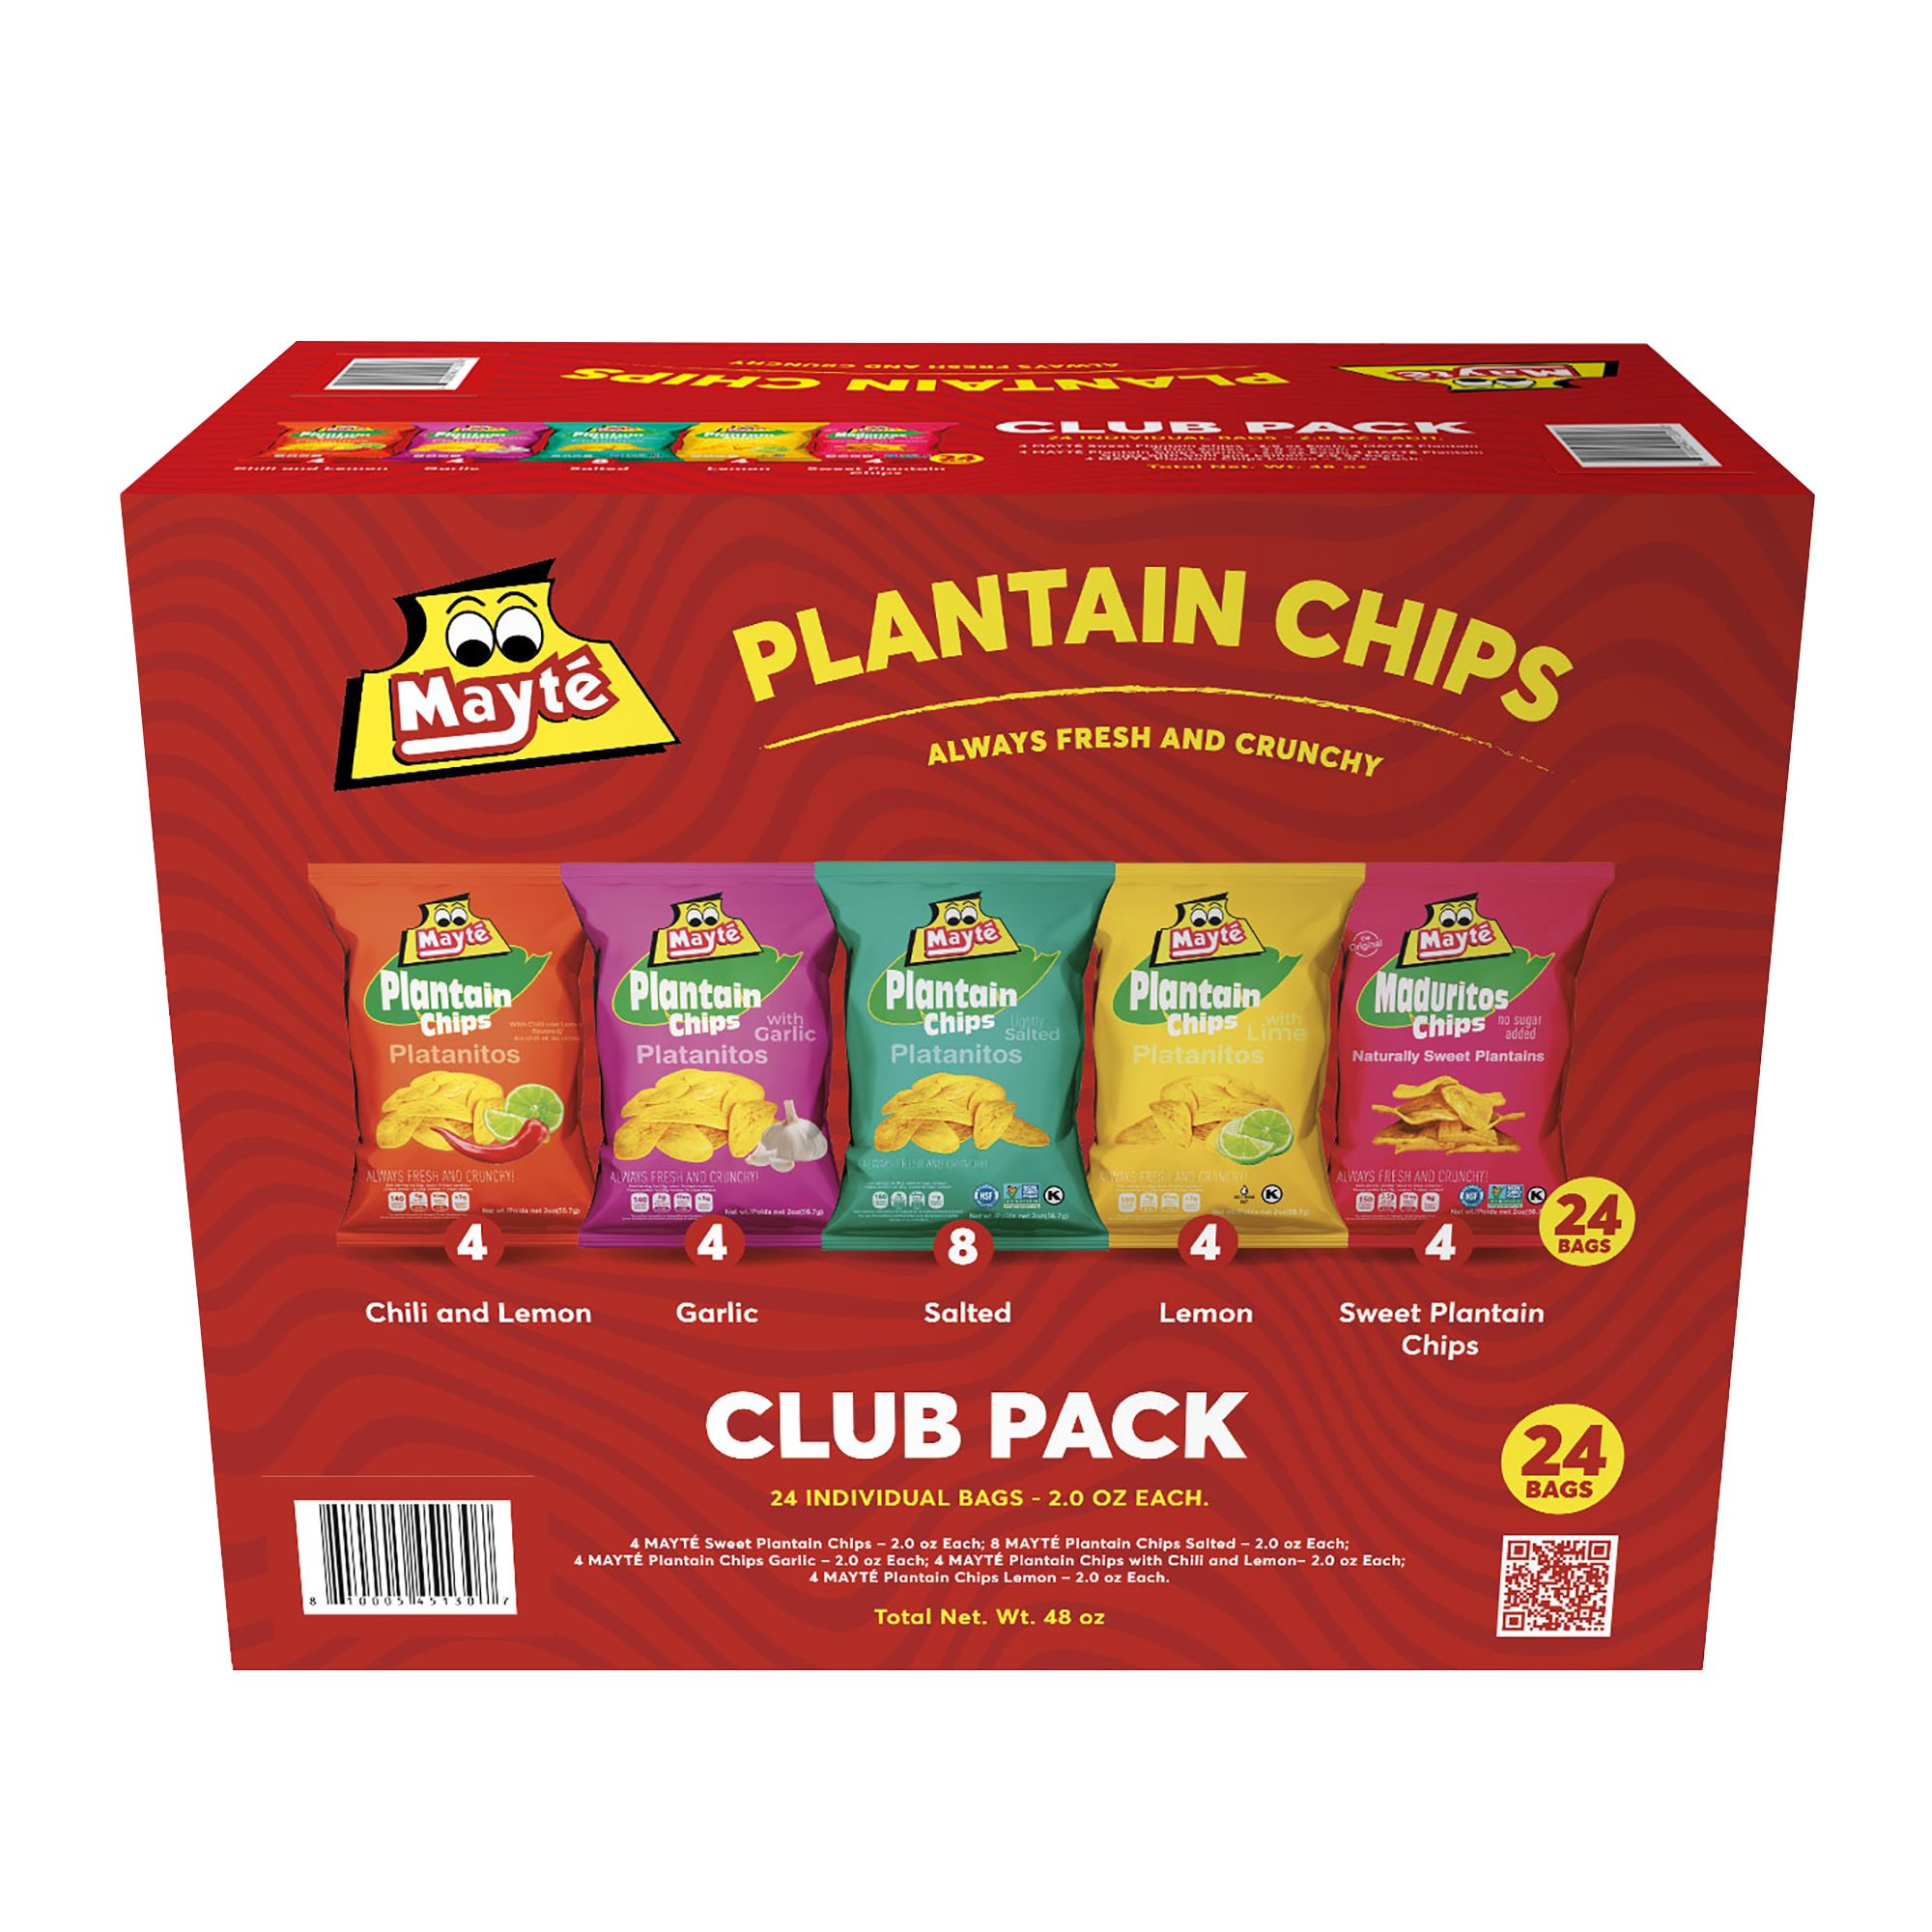 Mayte Plantain Chips Variety Pack, 24 ct./2 oz.